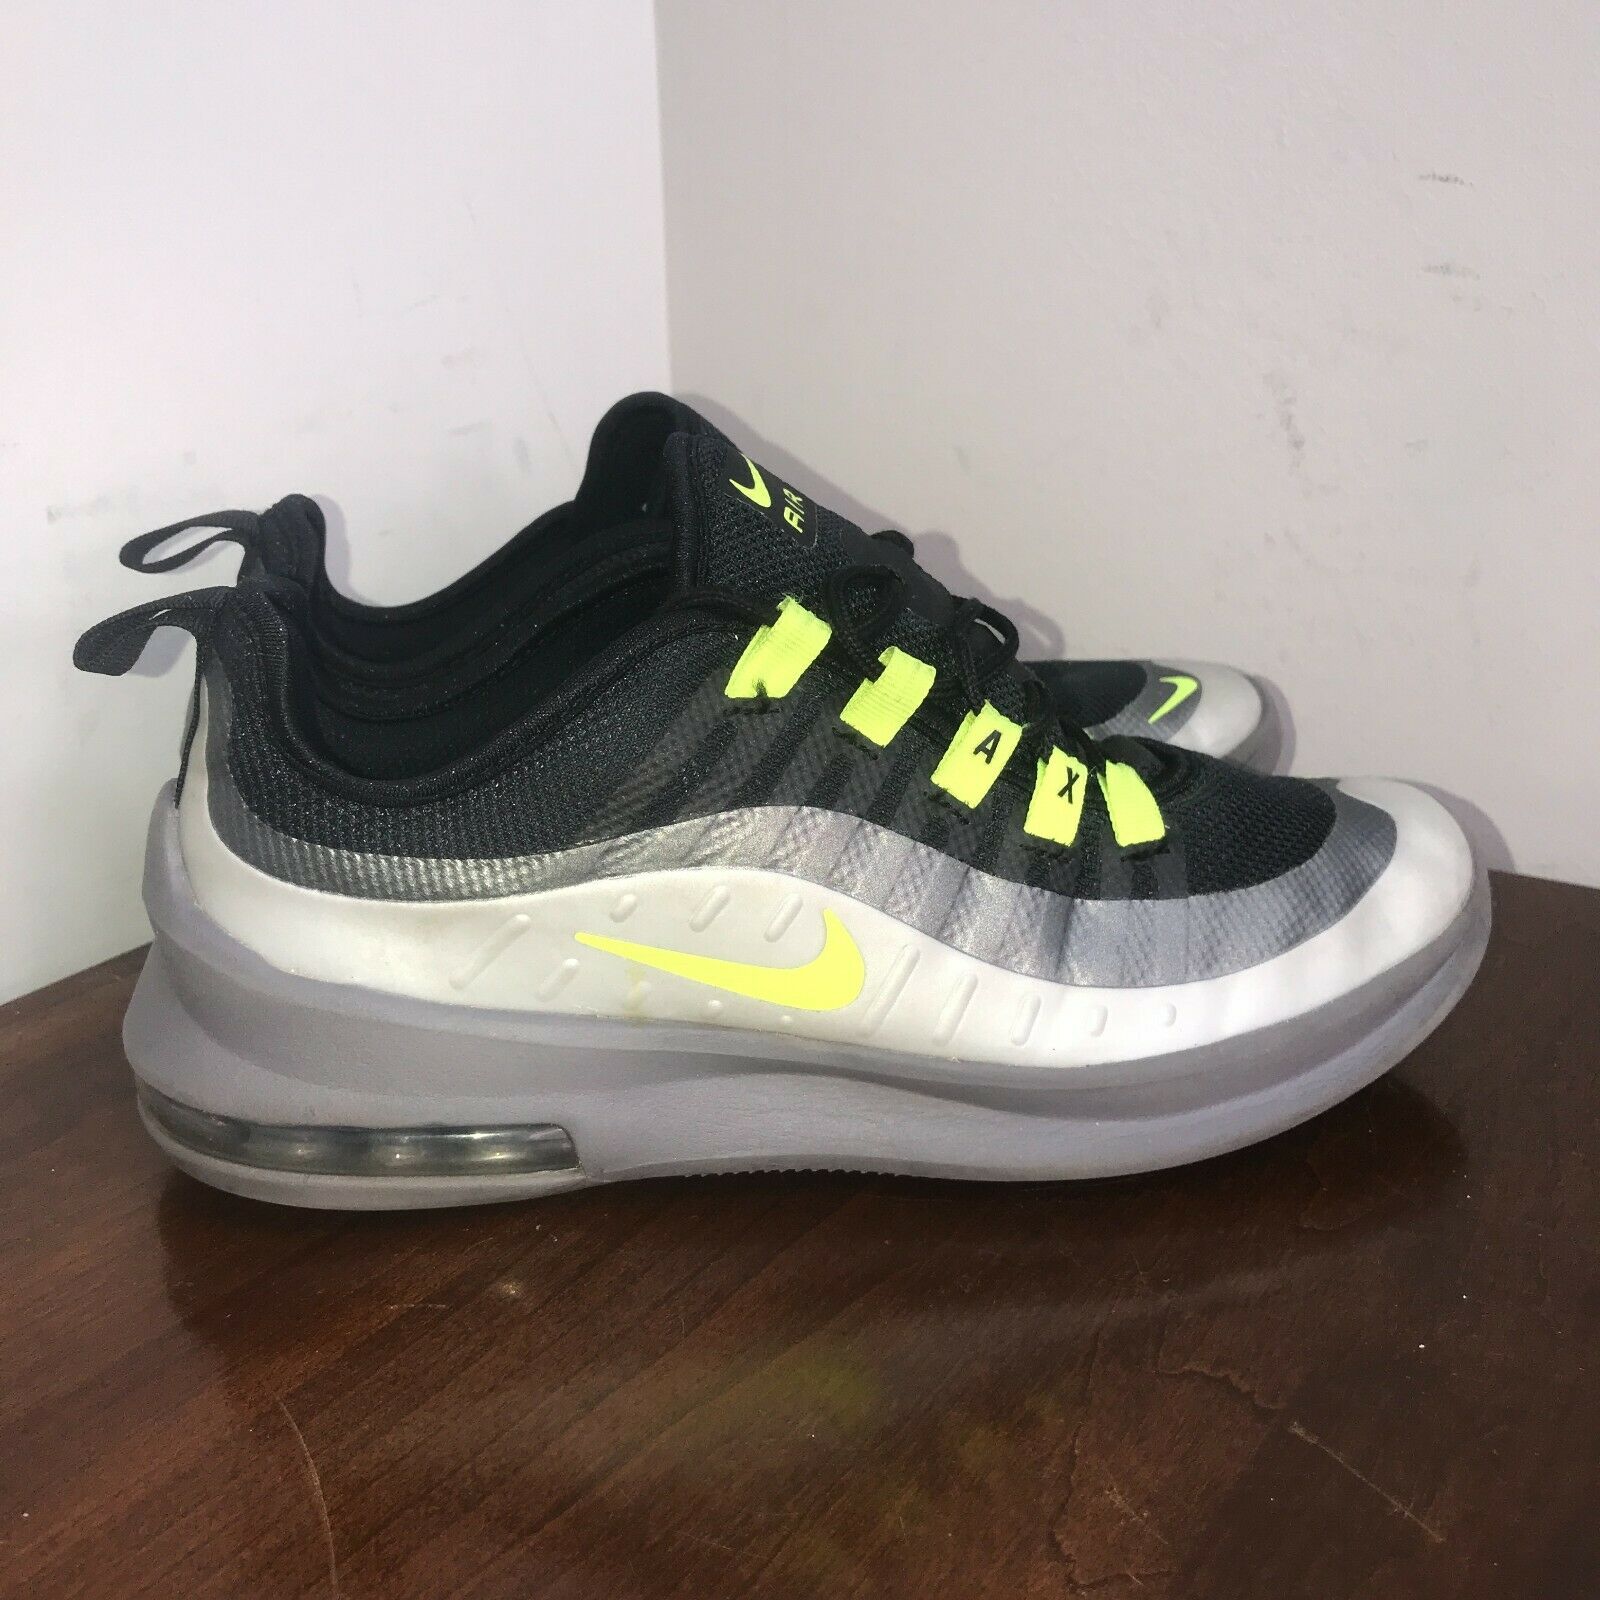 Nike Air Max AXIS Shoes AH5222-012 Black Grey Volt Kids Youth Size US 6Y